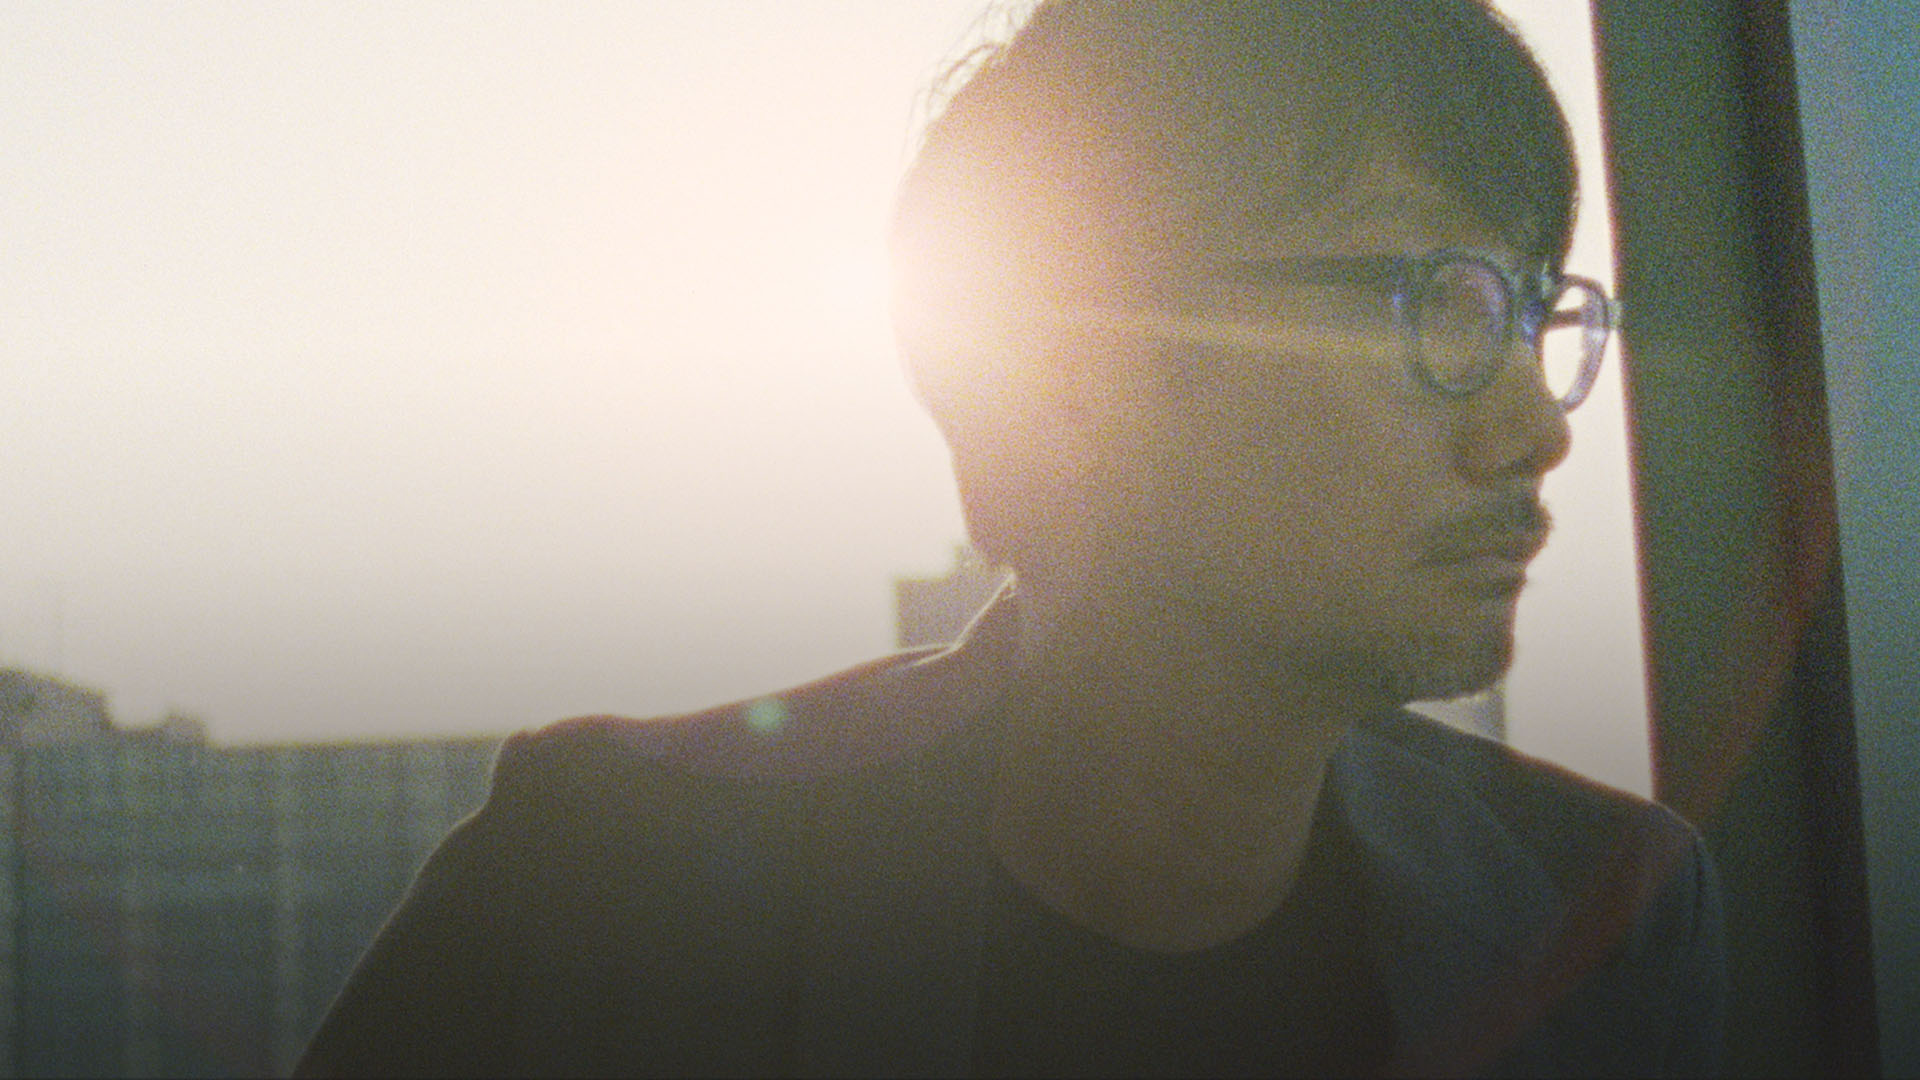 Hideo Kojima documentary iconises the 'first auteur of video games